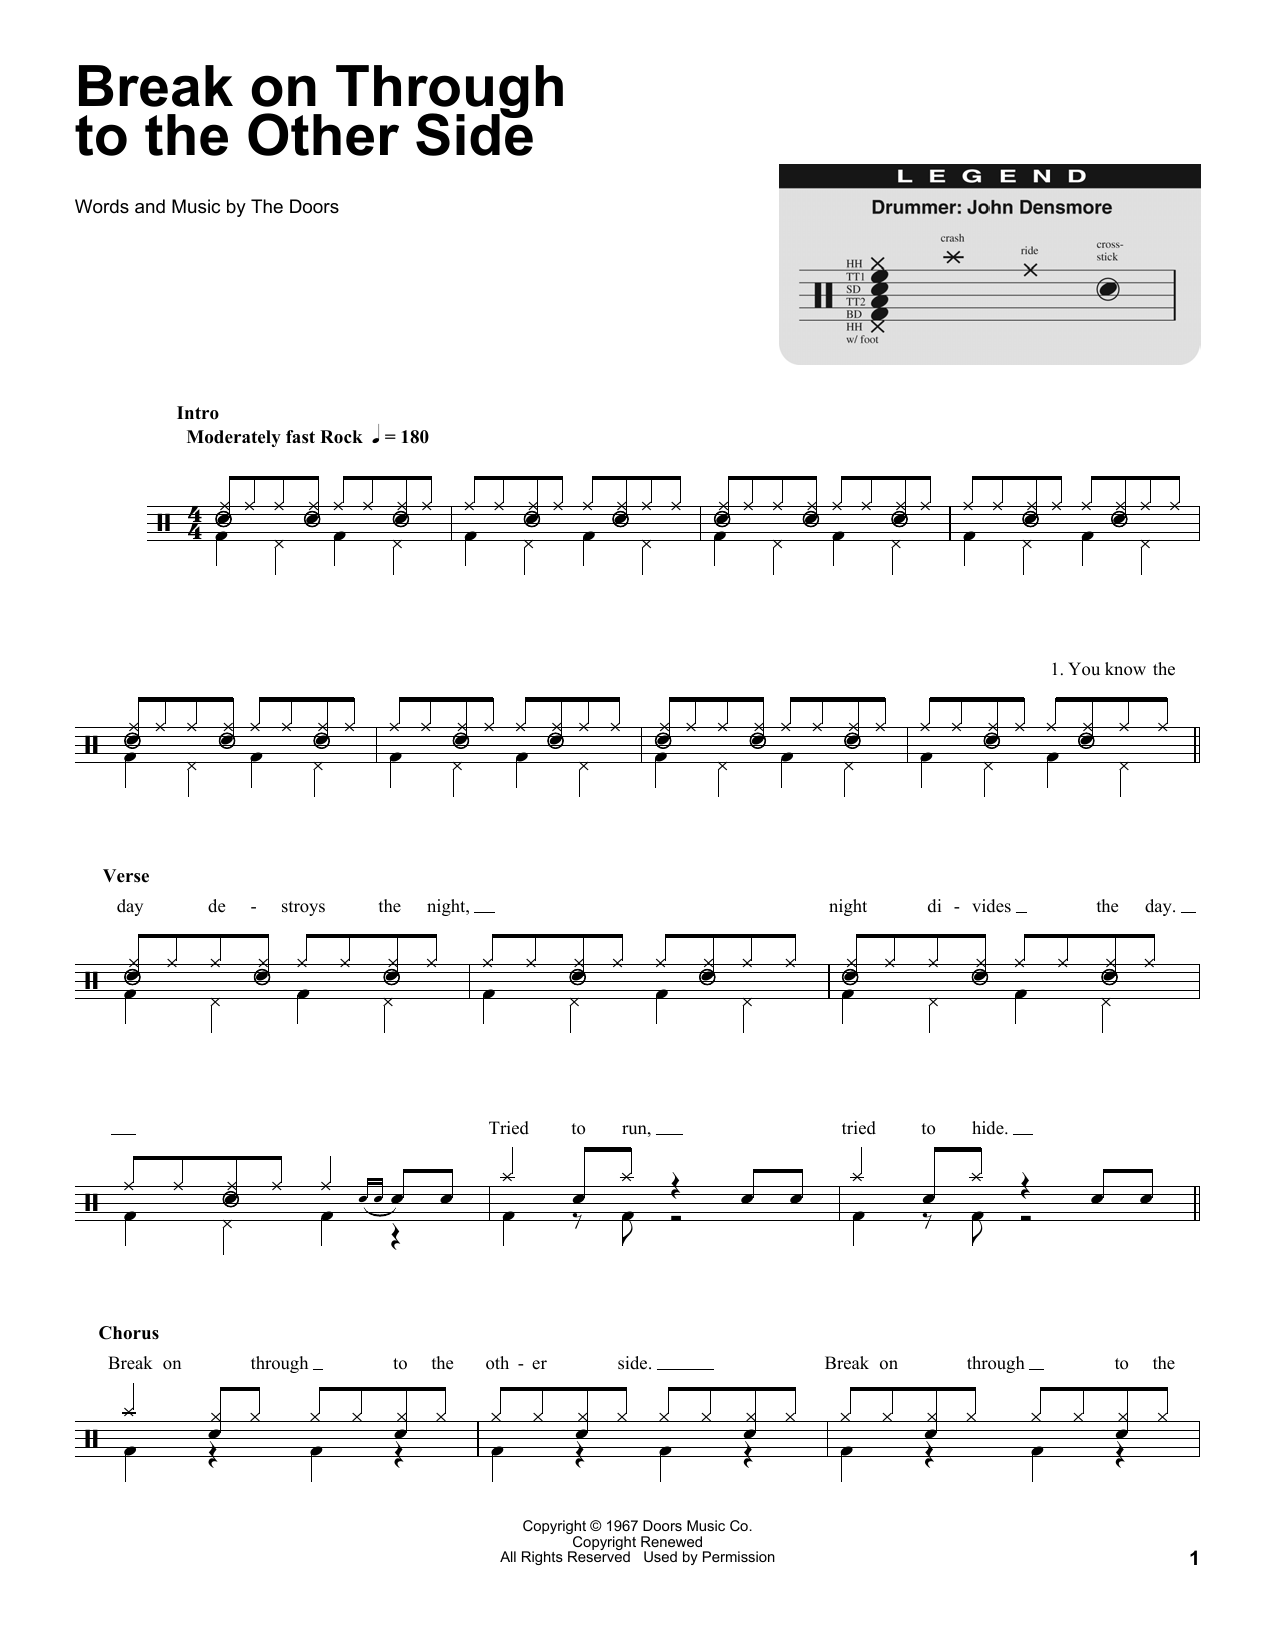 Download The Doors Break On Through To The Other Side Sheet Music